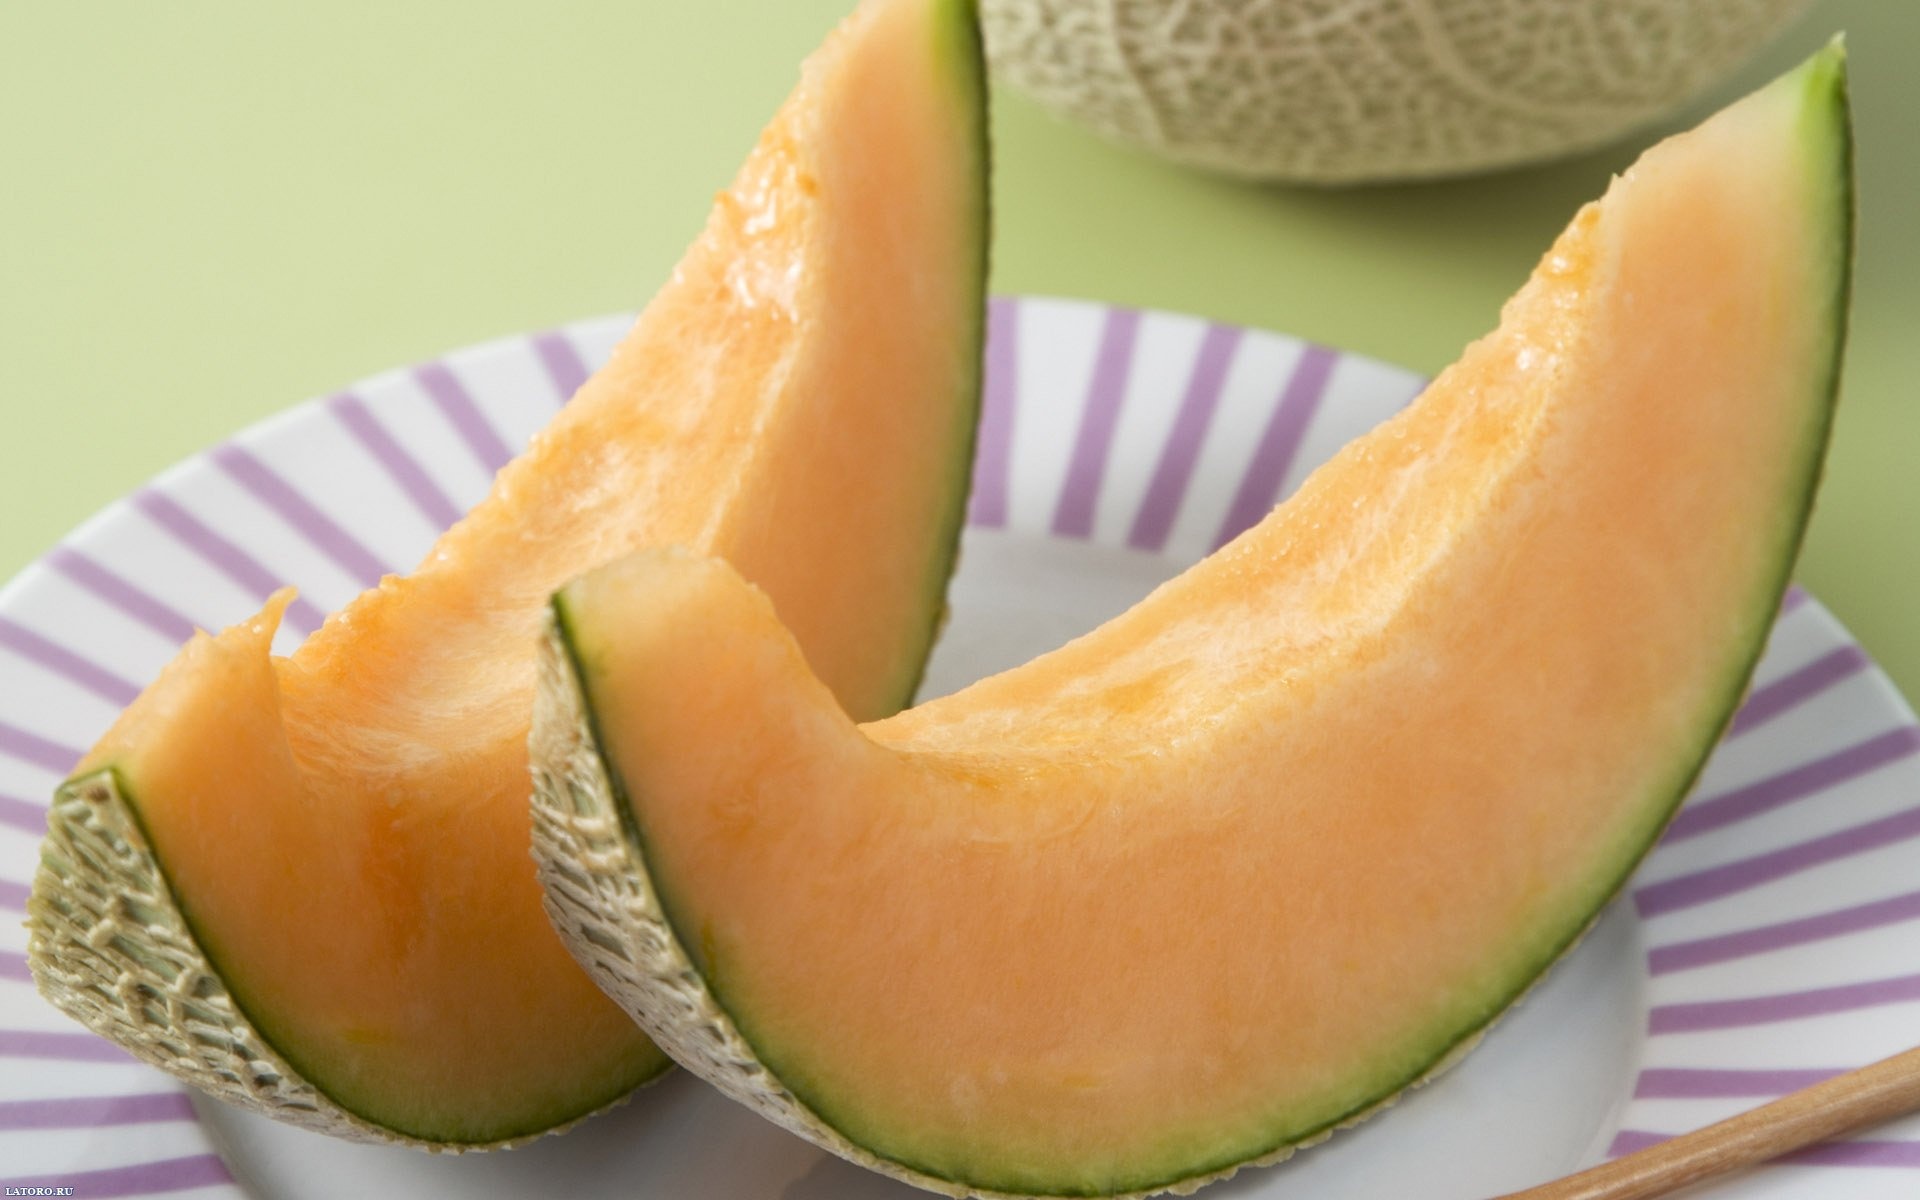 Melon: A juicy, orange summer fruit that's related to the watermelon. 1920x1200 HD Wallpaper.